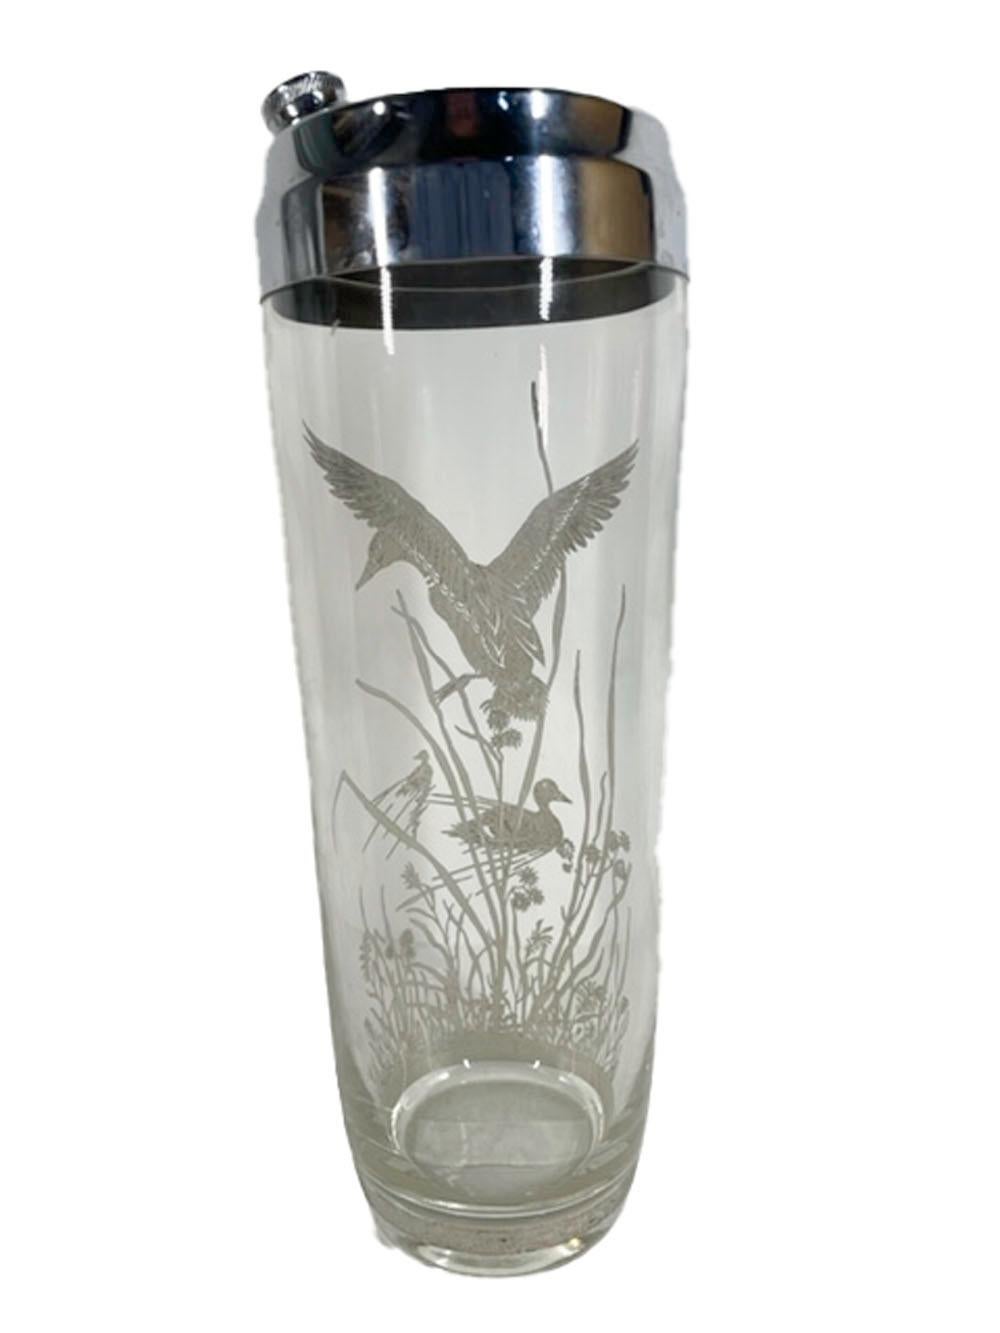 Clear glass cocktail shaker with a chrome lid and decorated with a sterling silver overlay scene of a duck landing in water with tall grass and other ducks swimming nearby.